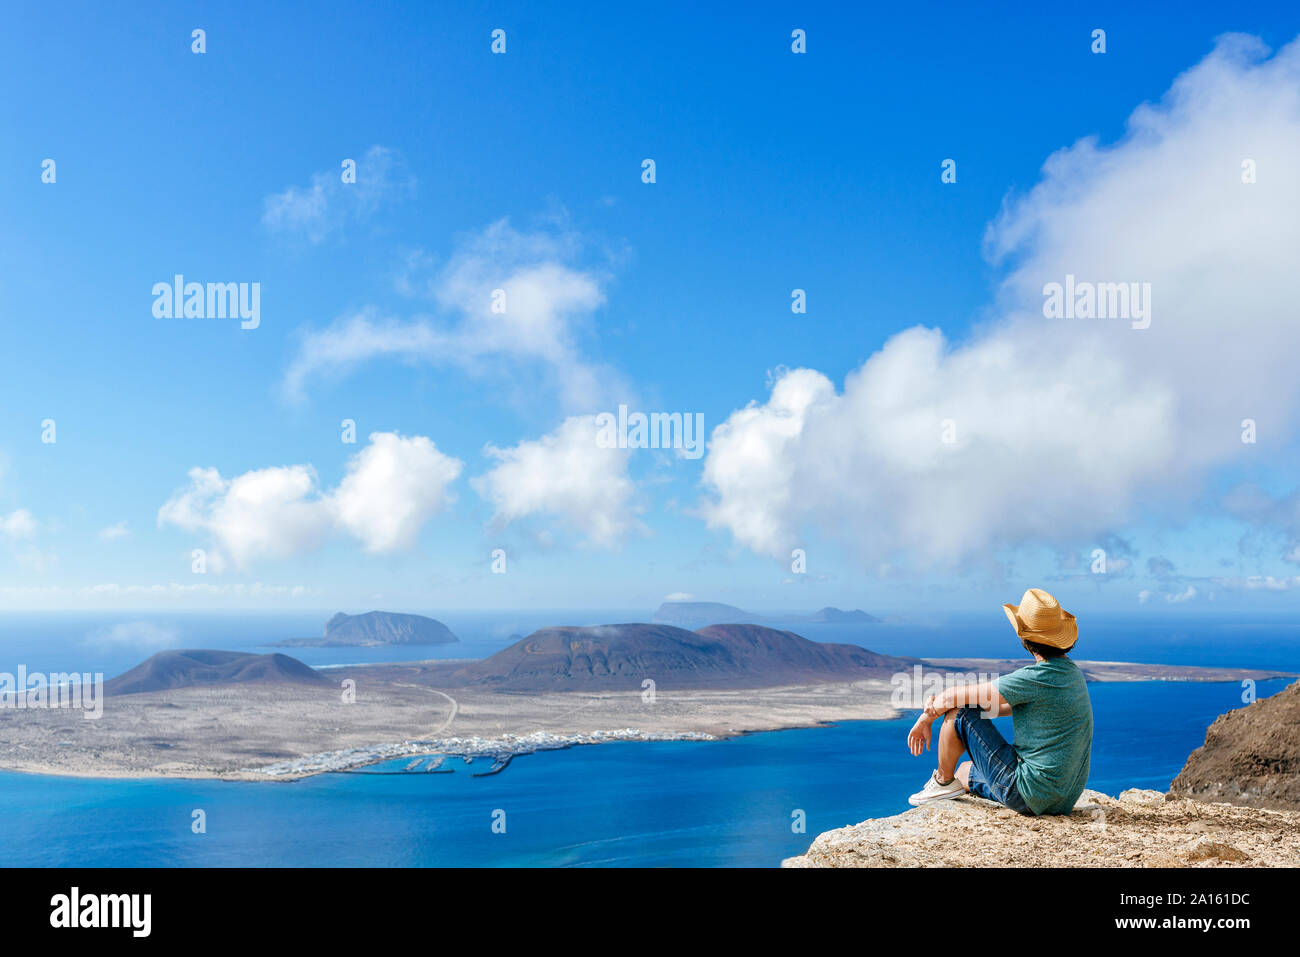 Man on viewpoint looking to La Gracioas island from Lanzarote, Canary Islands, Spain Stock Photo